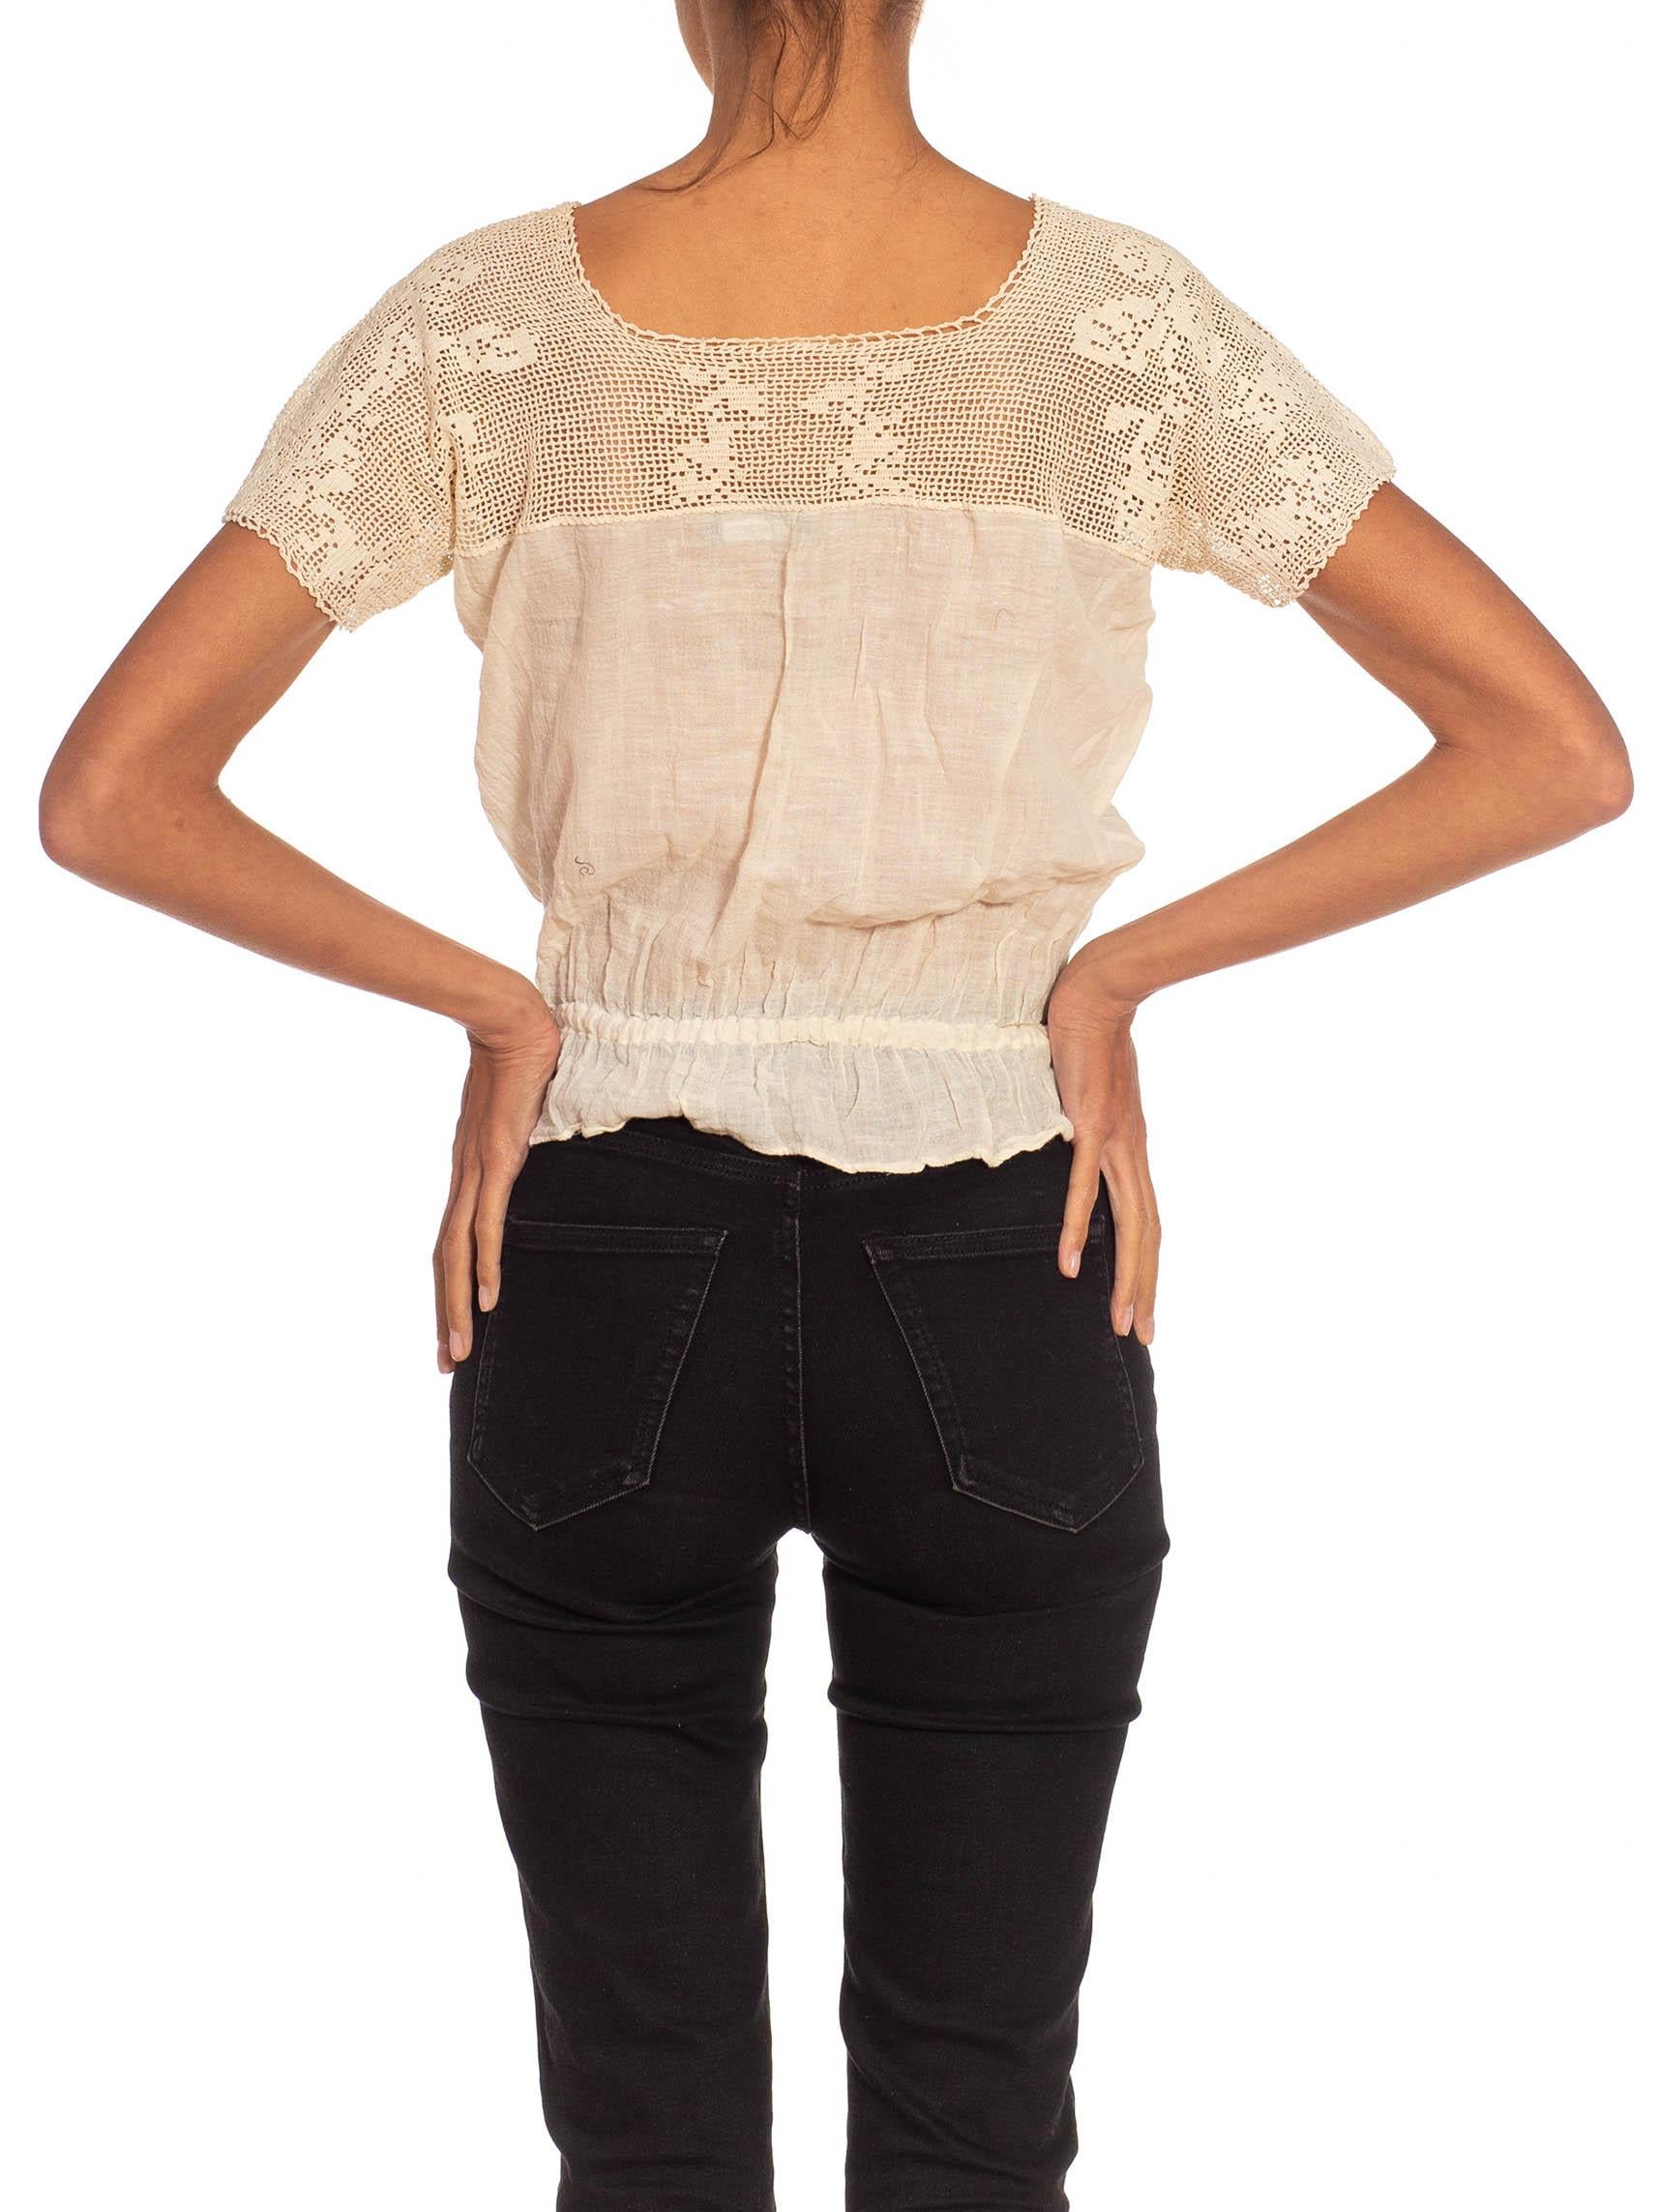 Victorian Off White Cotton Lace Top With Elastic Waist For Sale 5